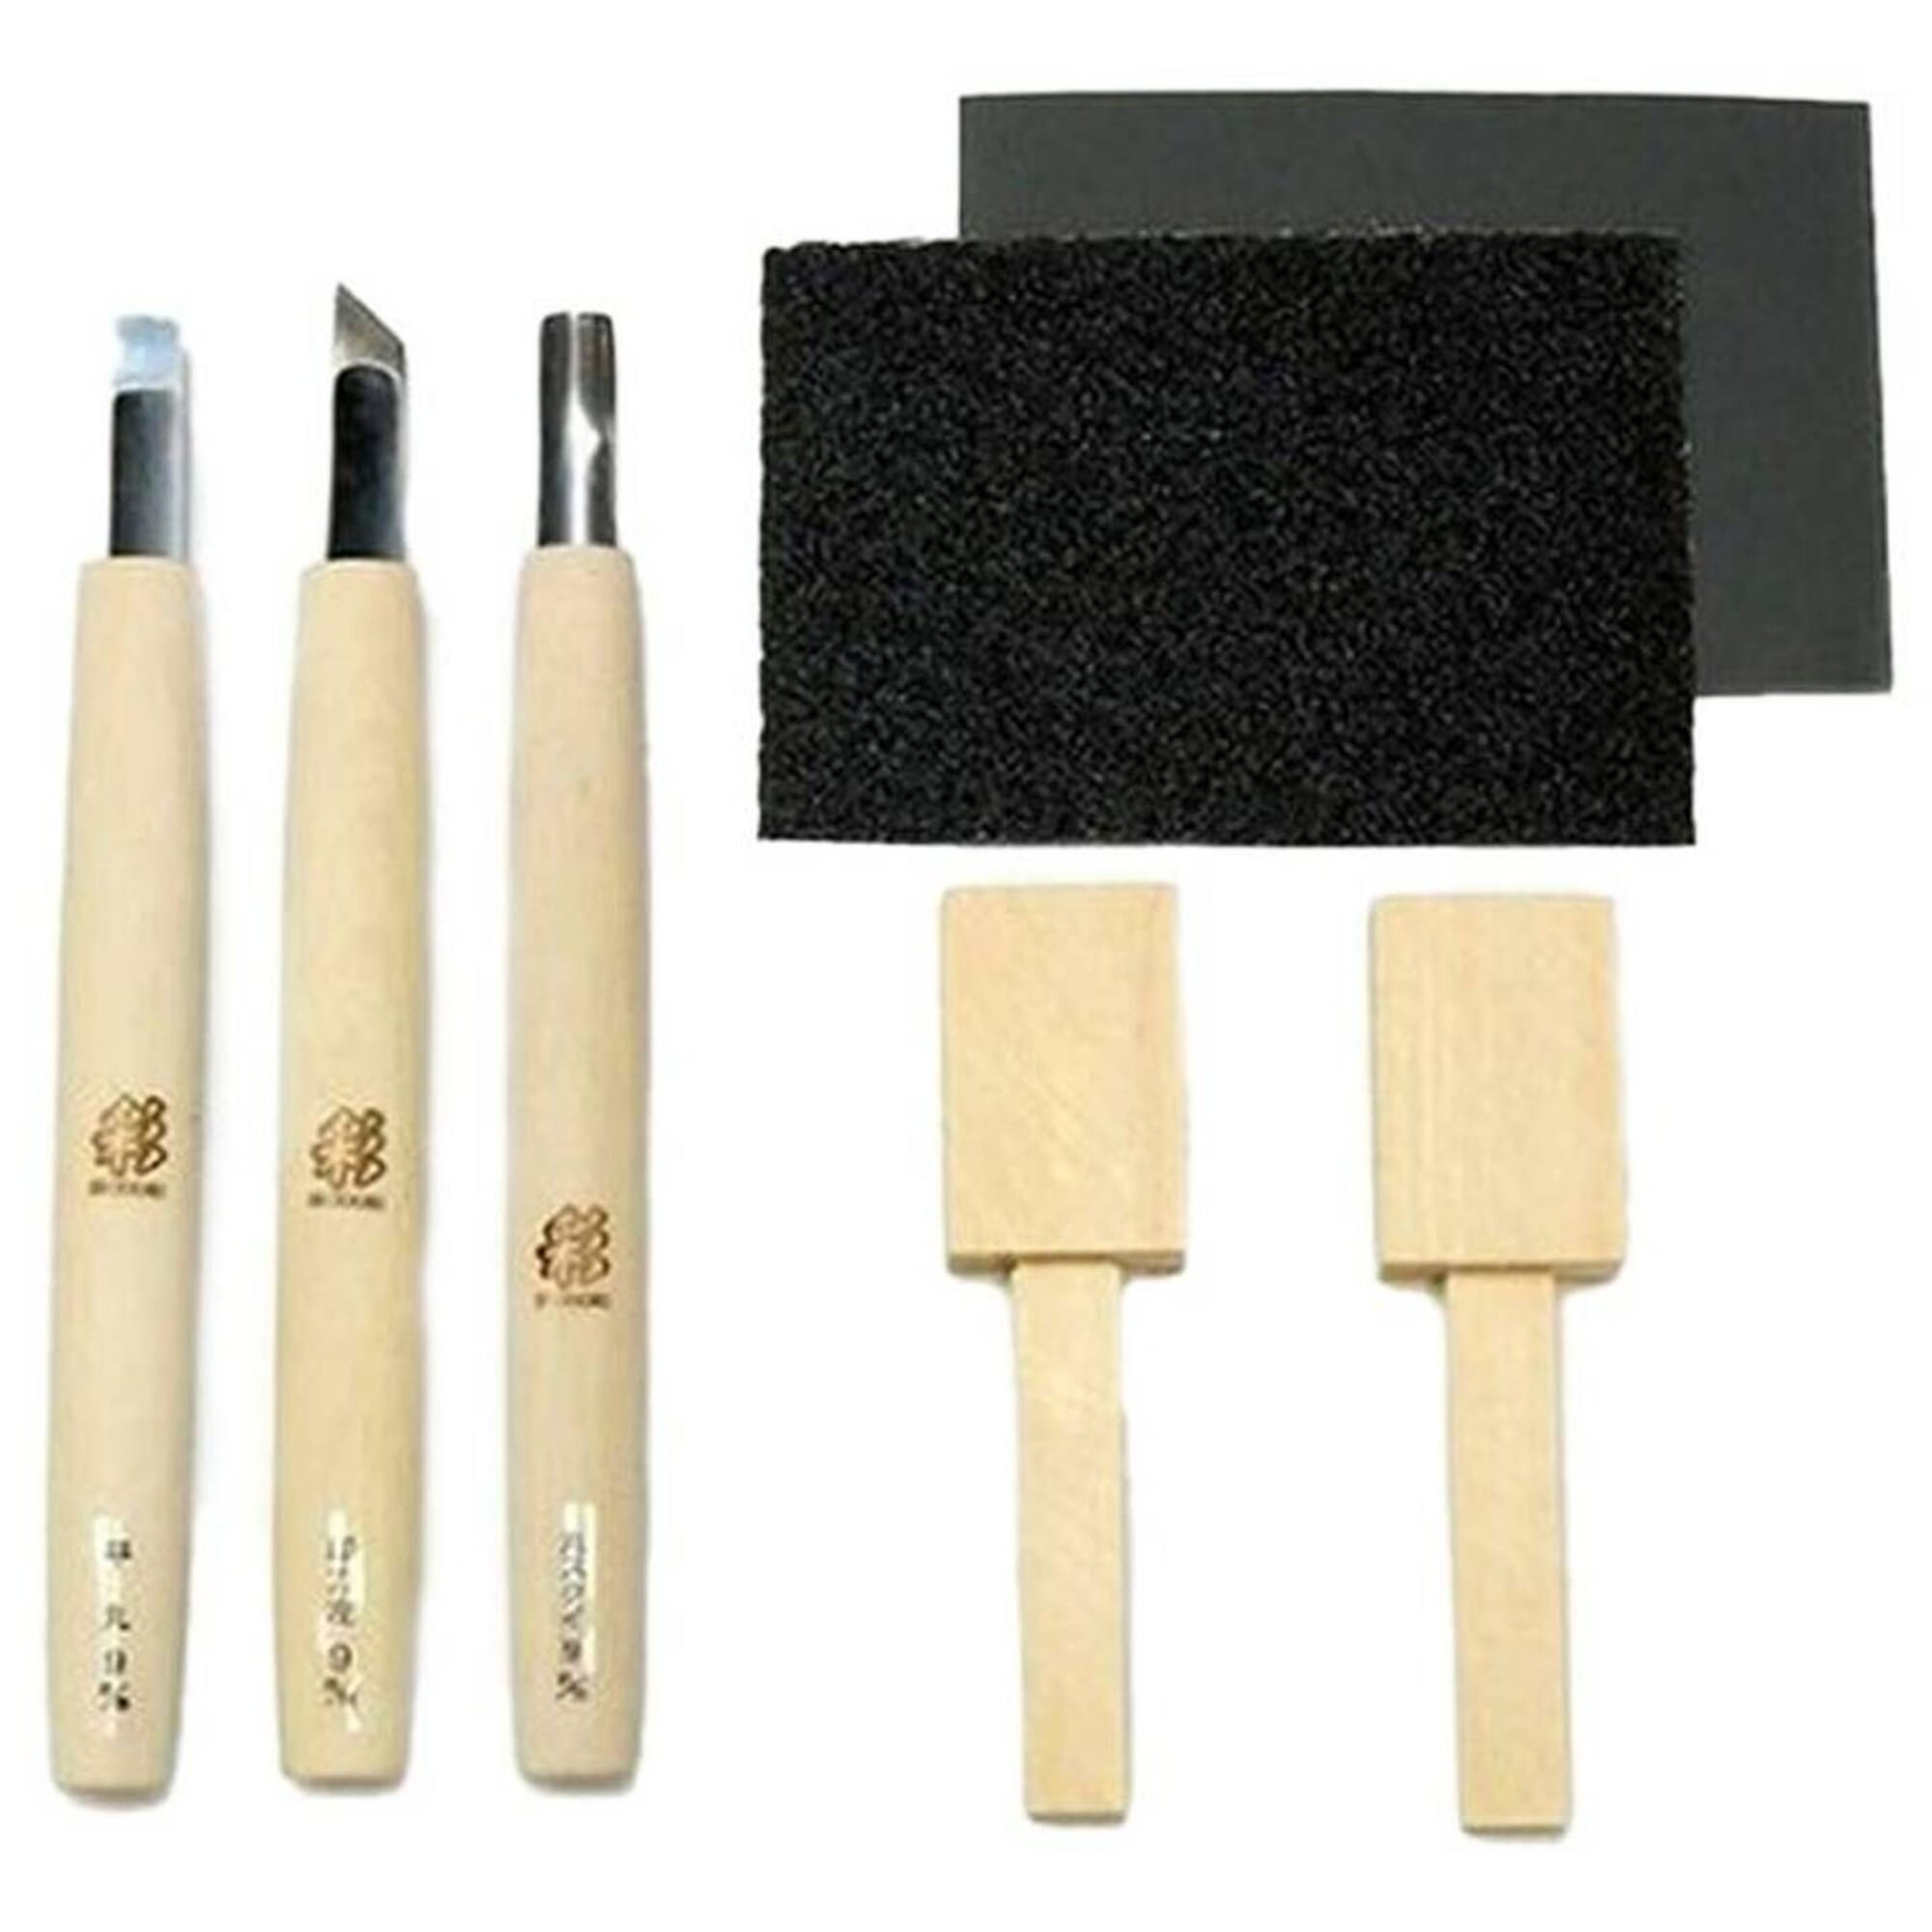 Spoon Carving Tool Kit - Wooden Spoon Carving